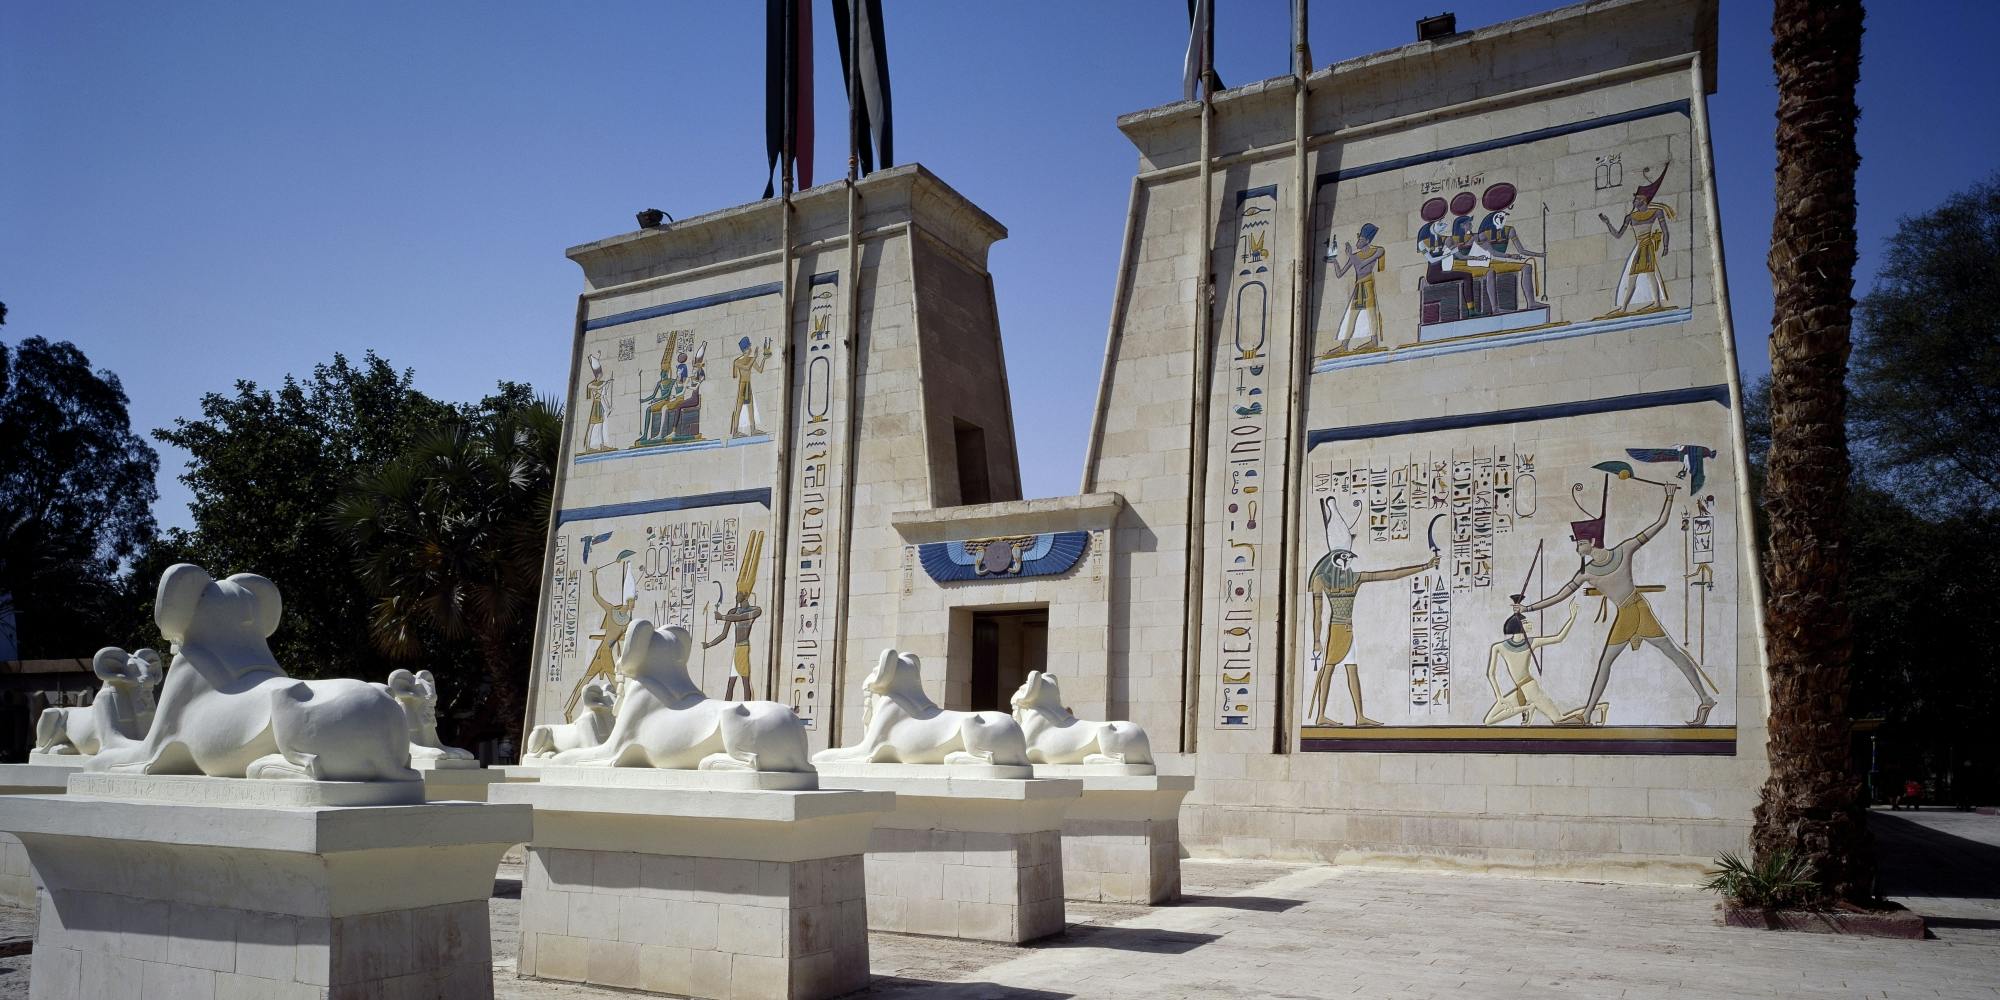 The Pharaonic Village entrance ticket Musement